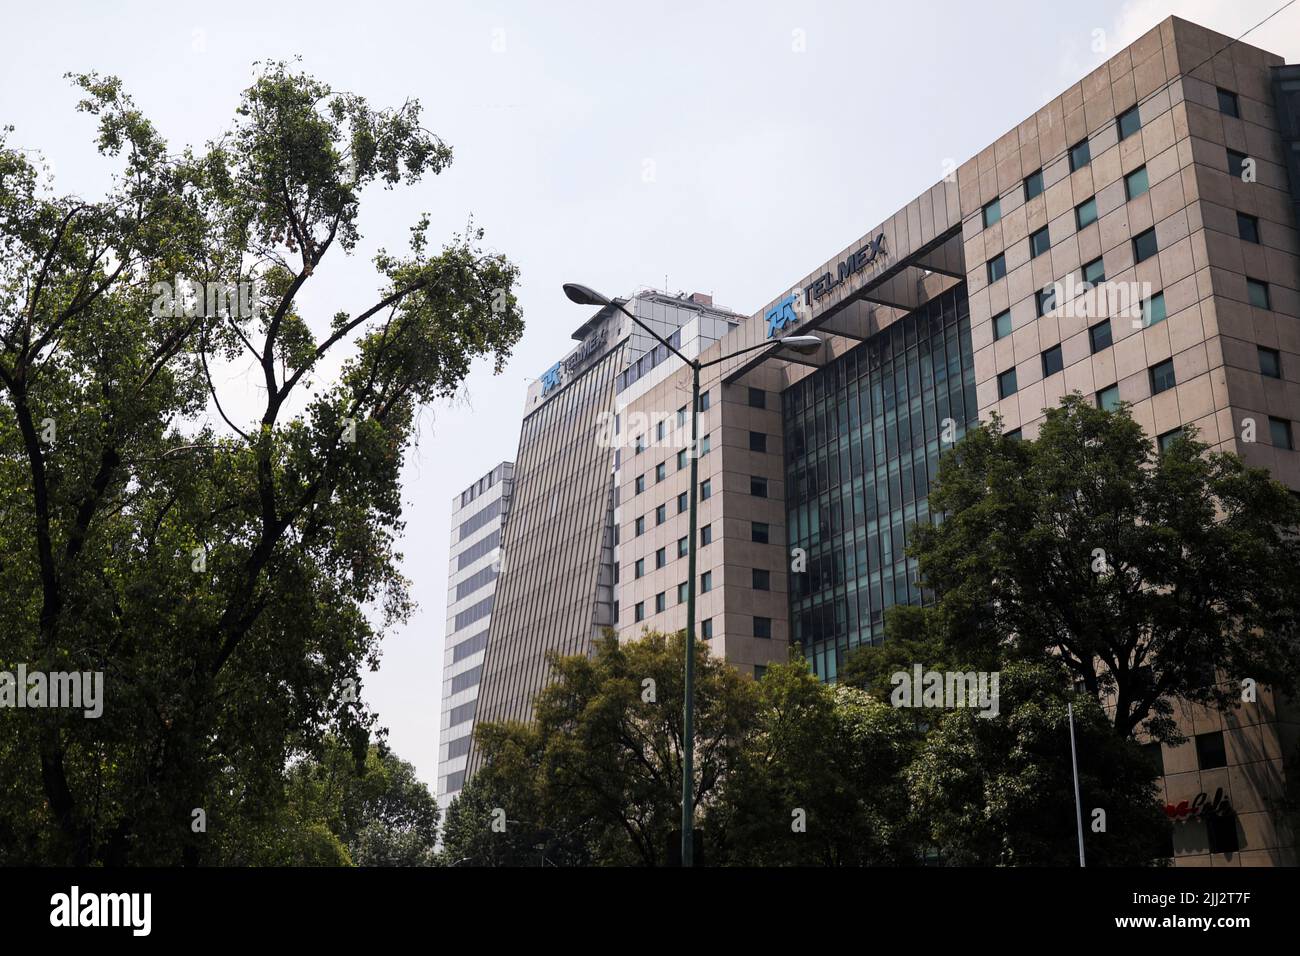 A view shows the Telmex headquarters, as the company's union went on strike after failing to come to an agreement with the company over a new collective labour agreement, in Mexico City, Mexico, July 22, 2022. REUTERS/Edgard Garrido Stock Photo